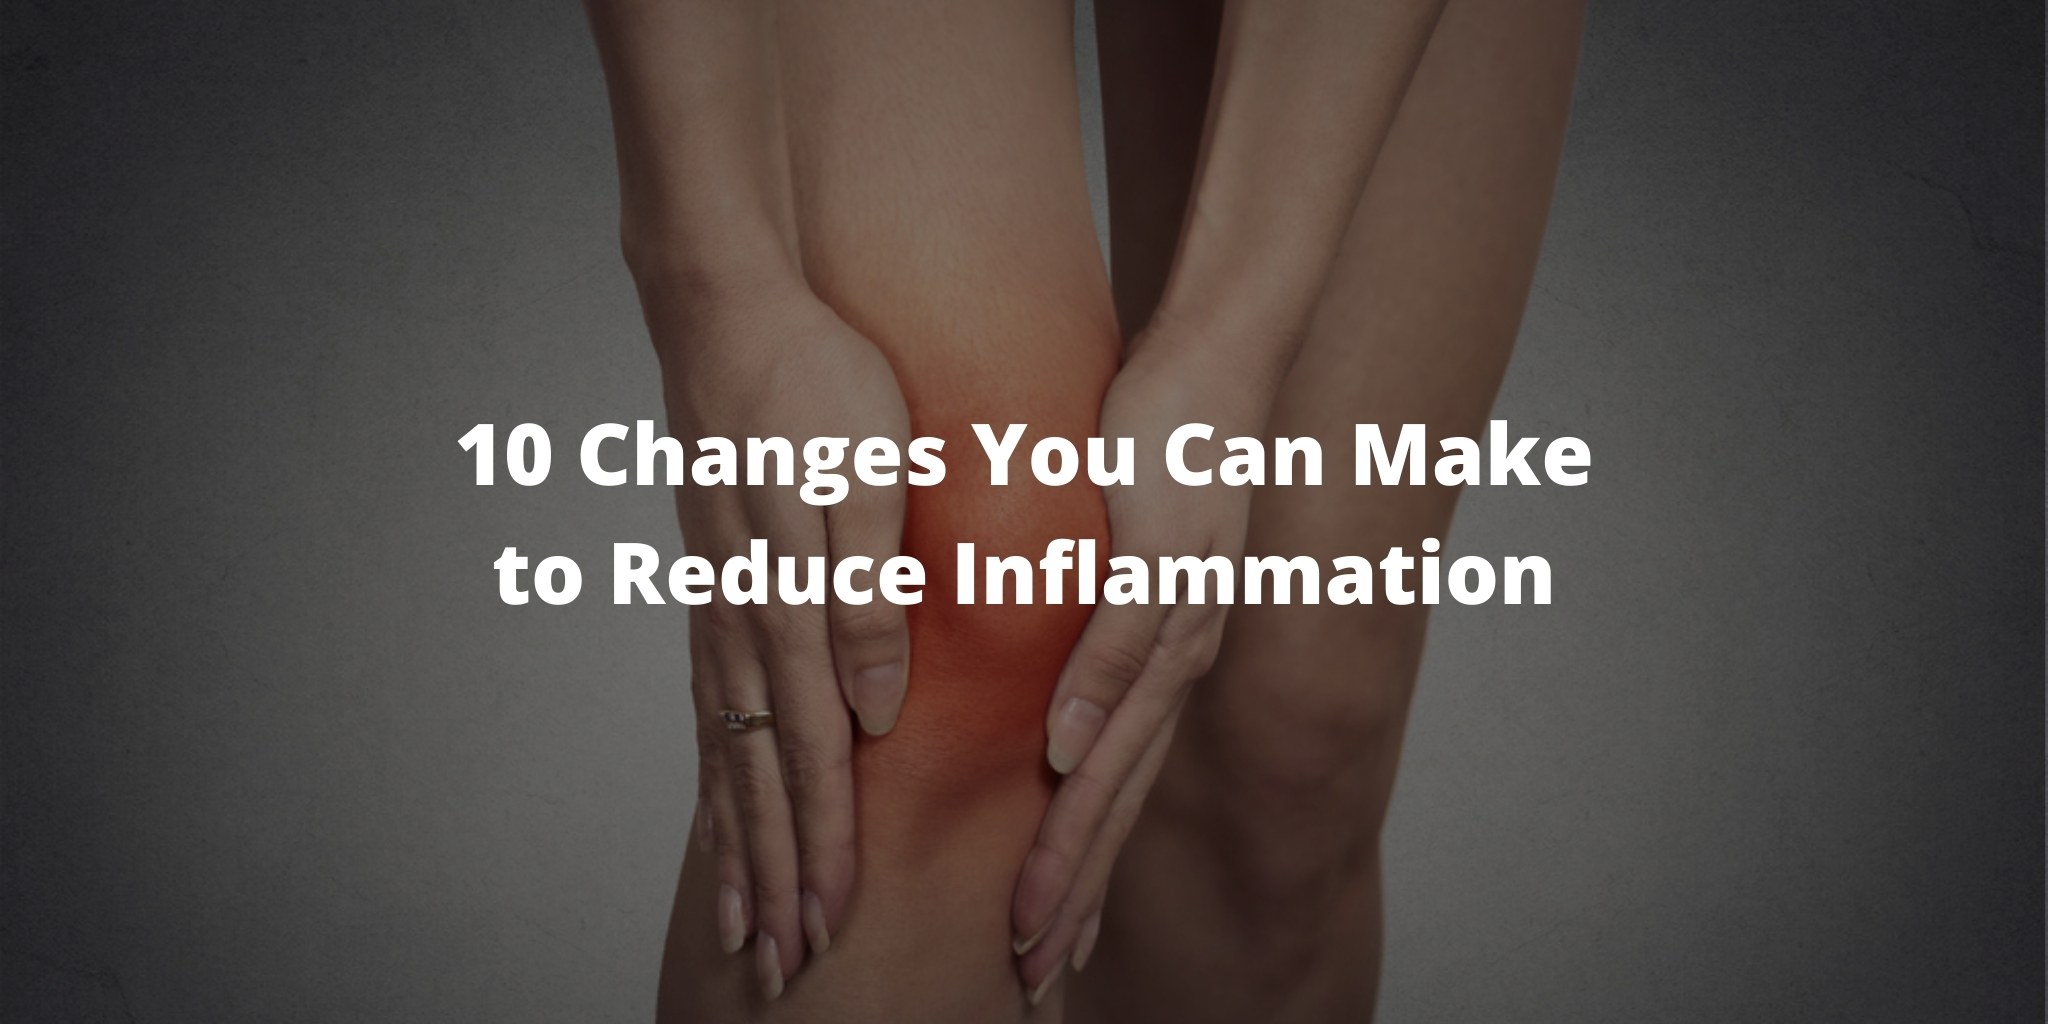 10 Changes You Can Make to Reduce Inflammation